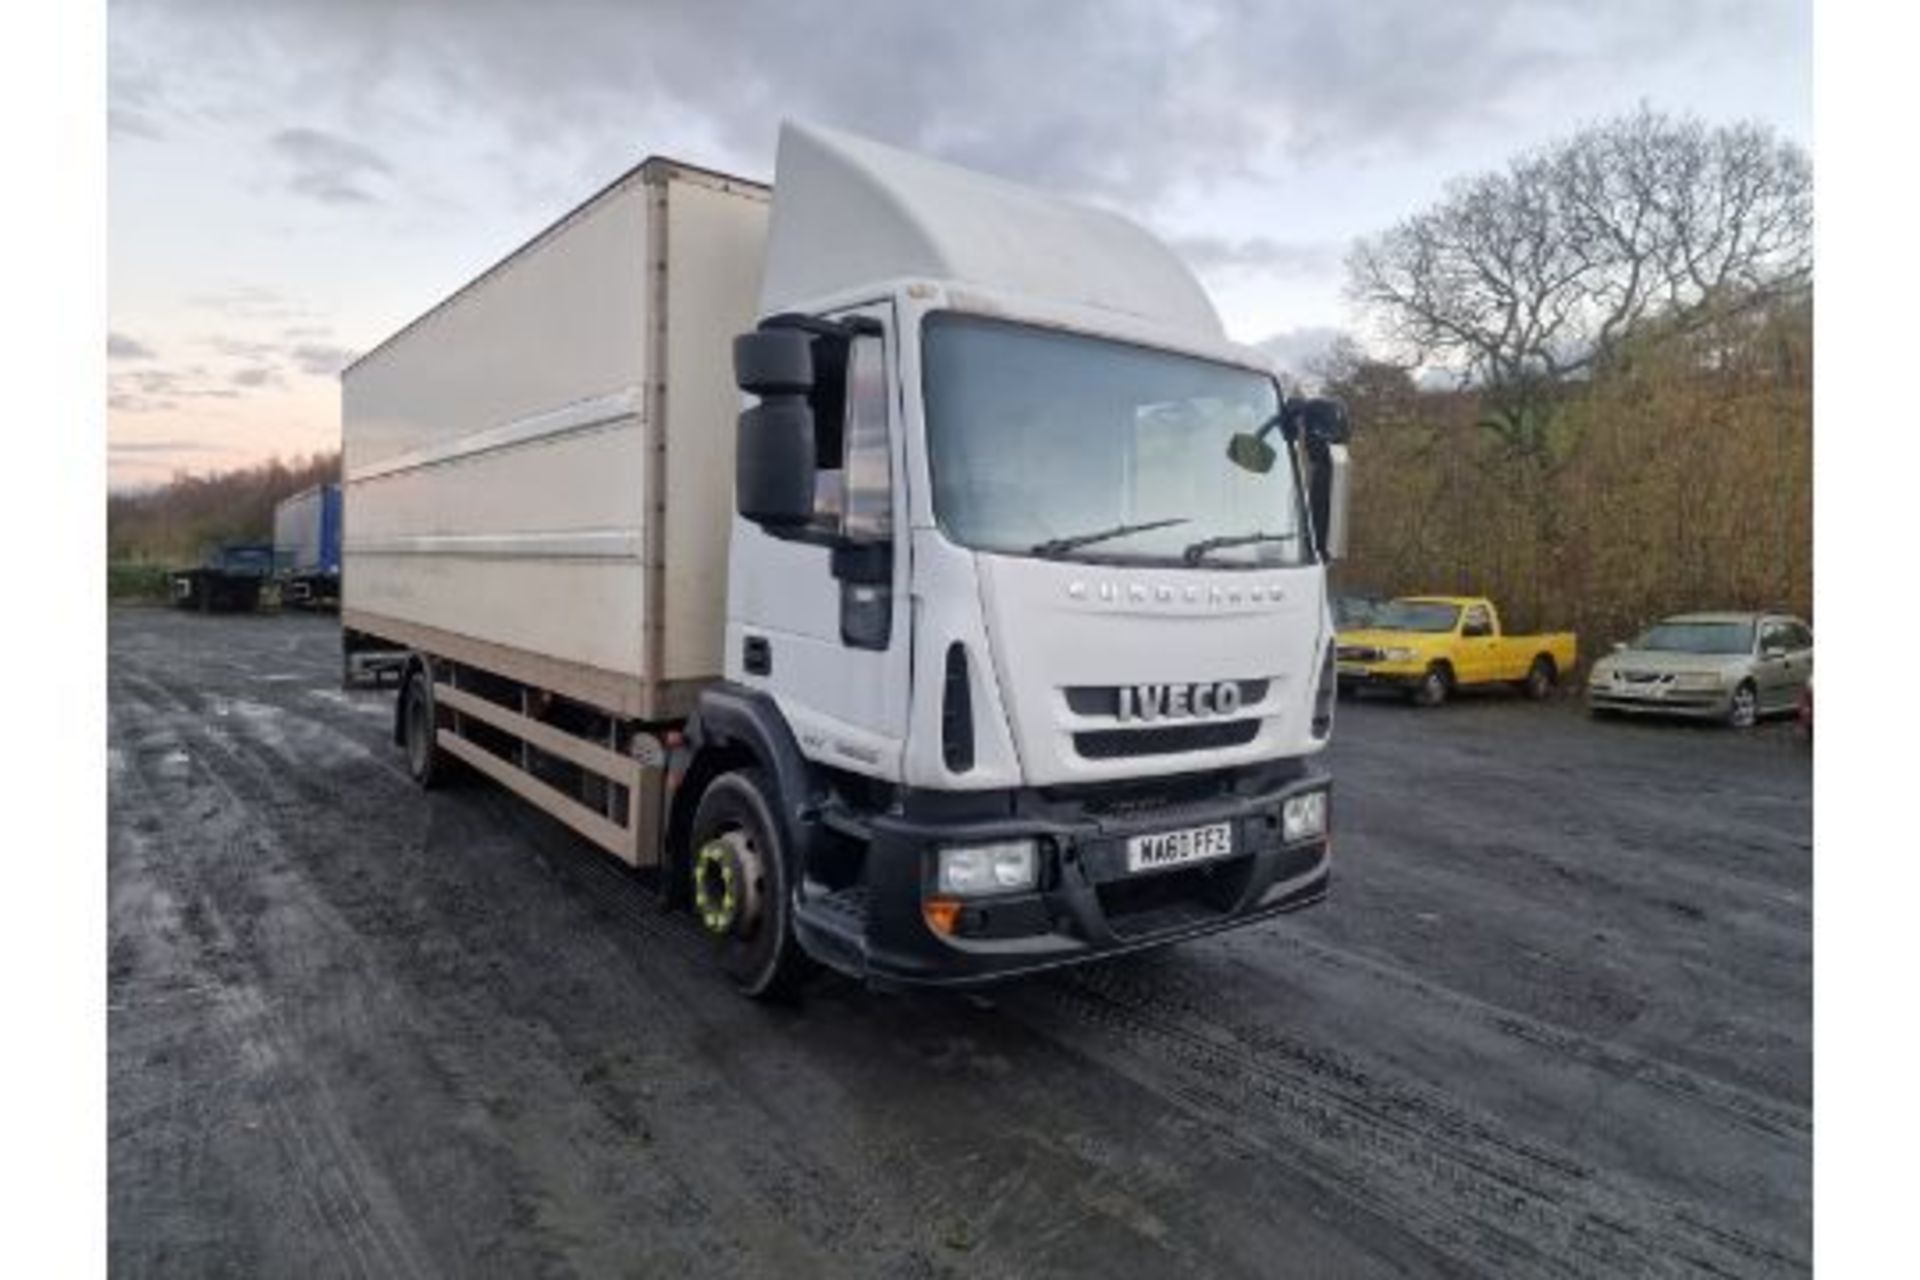 10/60 IVECO EUROCARGO (MY 2008) - 5880cc 2dr Lorry (White) - Image 8 of 16